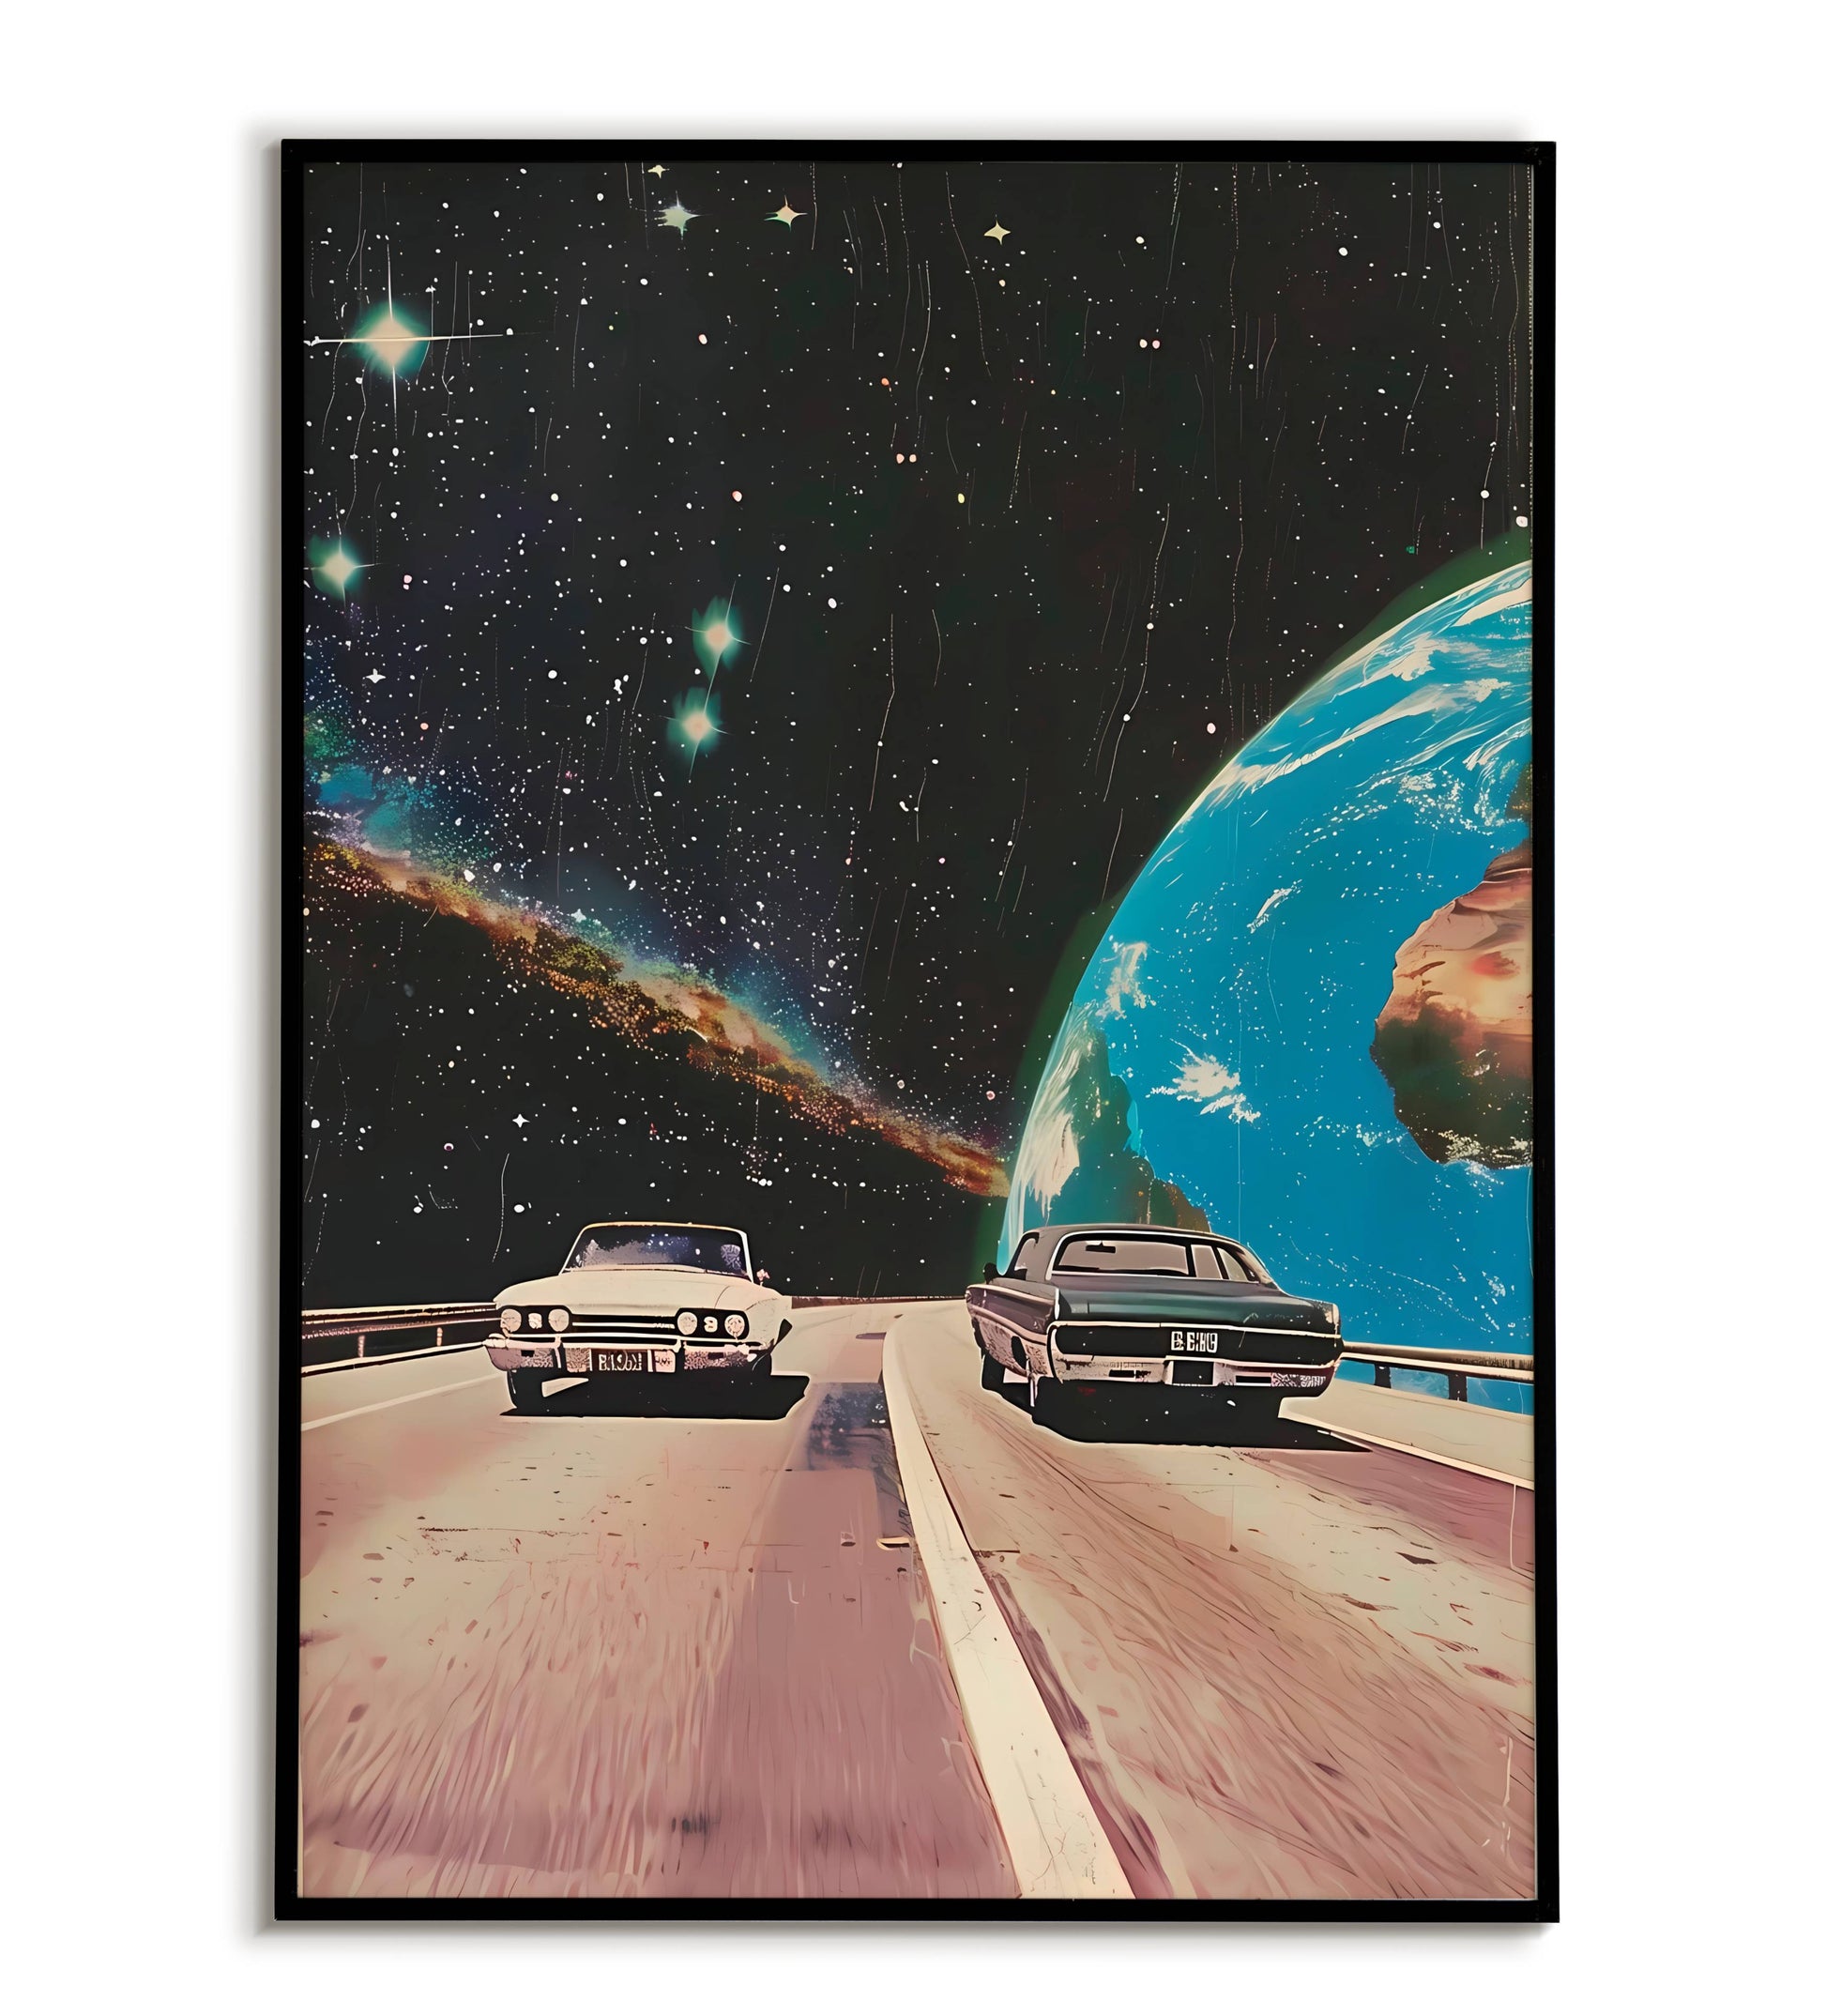 Space Road Journey printable poster. Available for purchase as a physical poster or digital download